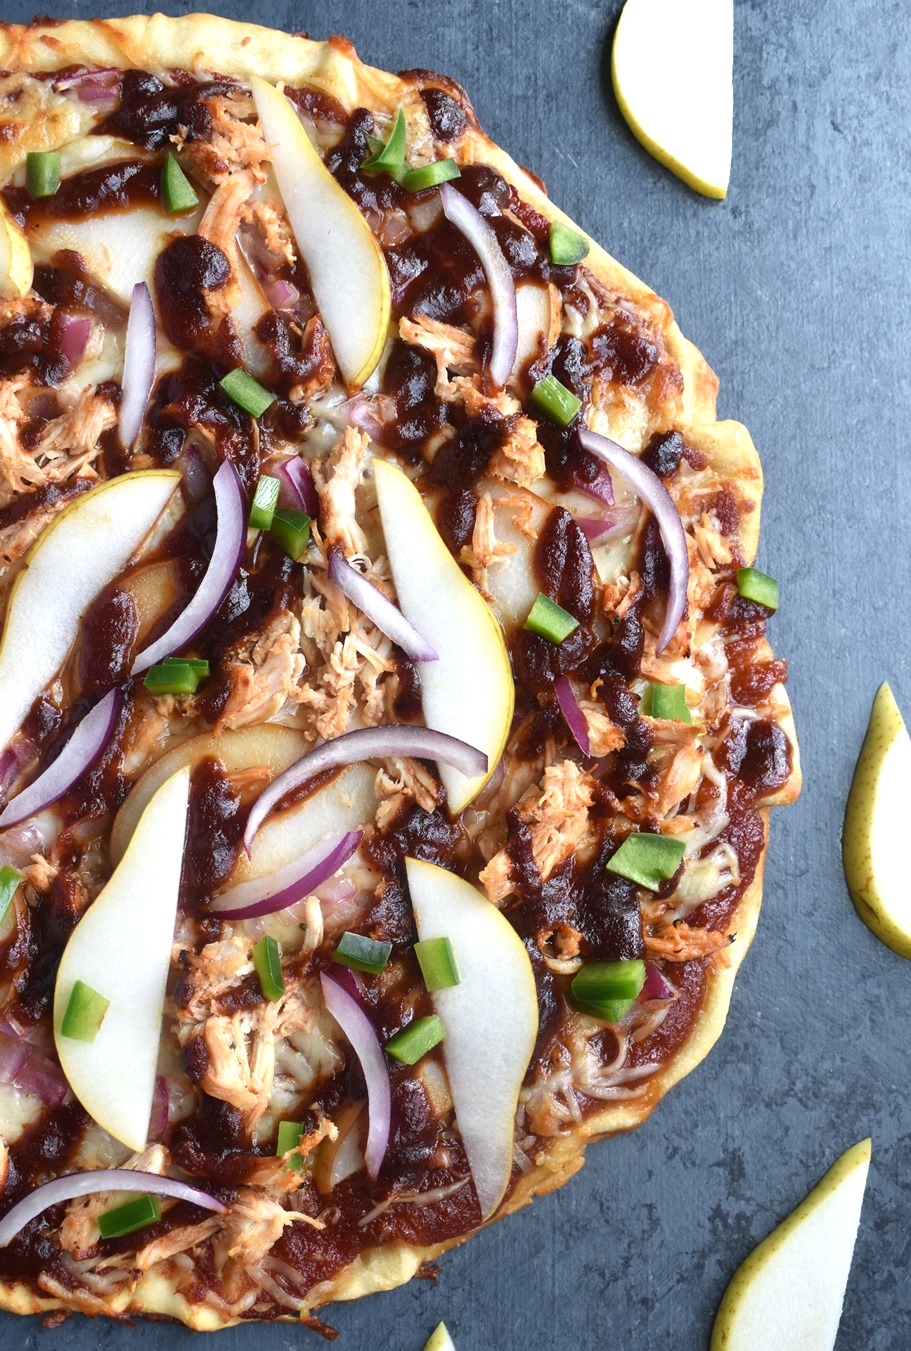 Pear BBQ Chicken Pizza features a thin crispy pizza crust topped with sweet and smoky barbecue sauce, shredded chicken, red onion, sliced pear, green pepper and melted cheese!